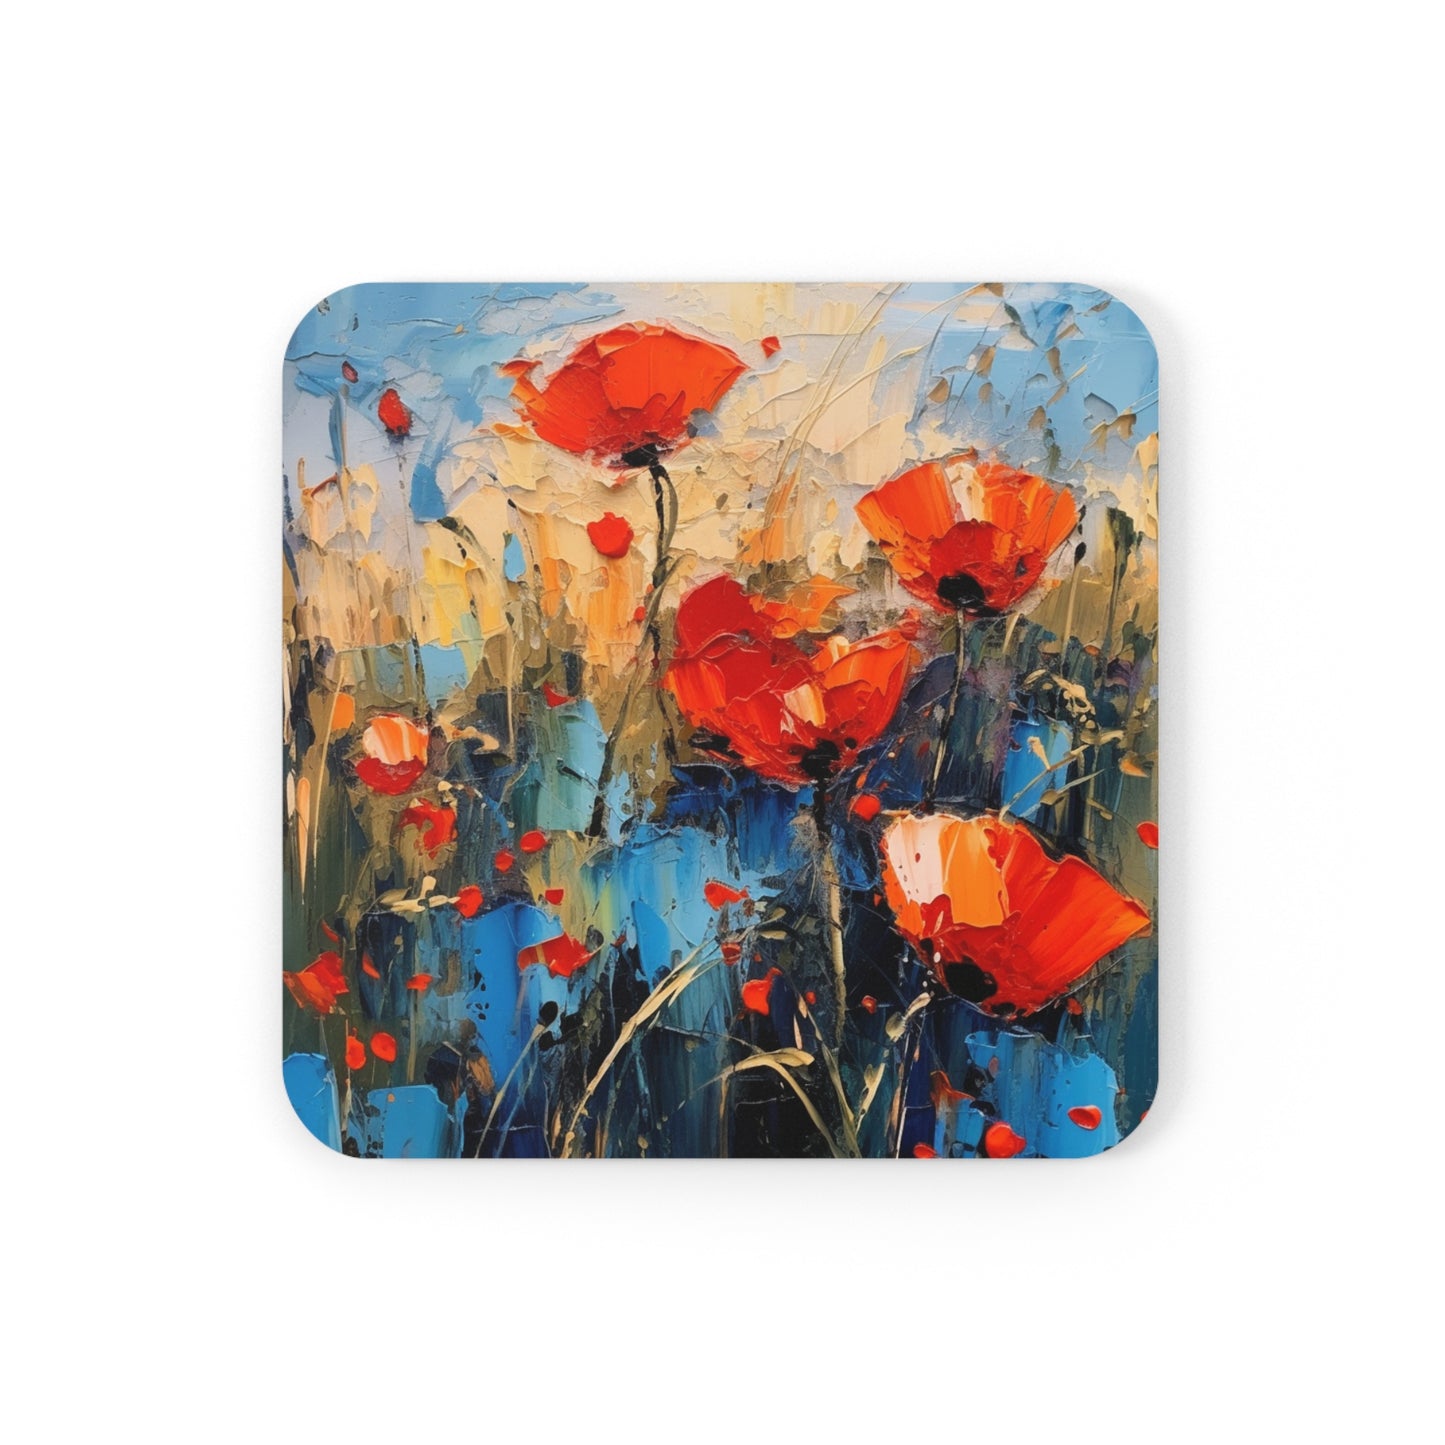 Corkwood Coaster Set Paradise: Abstract Poppy Artwork and Flower Drawings